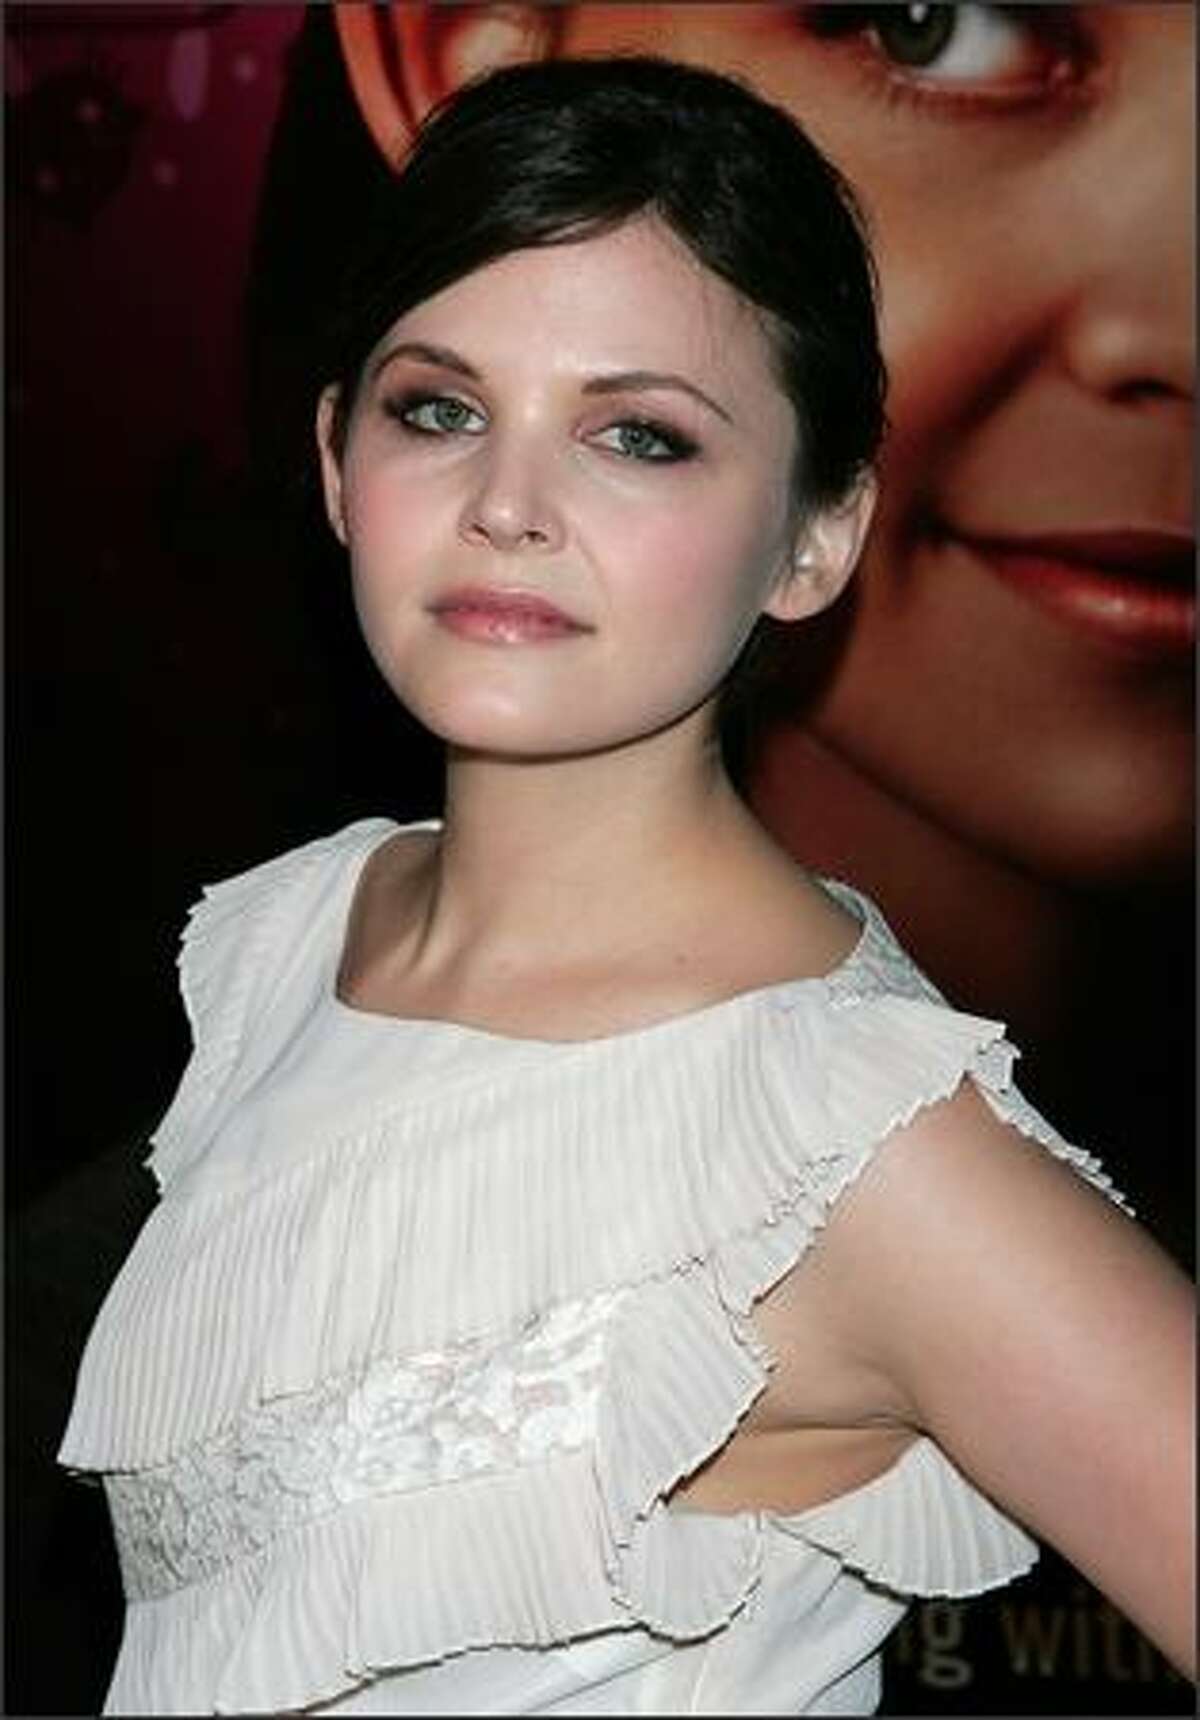 Actress Ginnifer Goodwin attends the premiere of HBO's "Big Love" 3rd season at the Cinerama Dome January 14, 2009 in Hollywood, California.